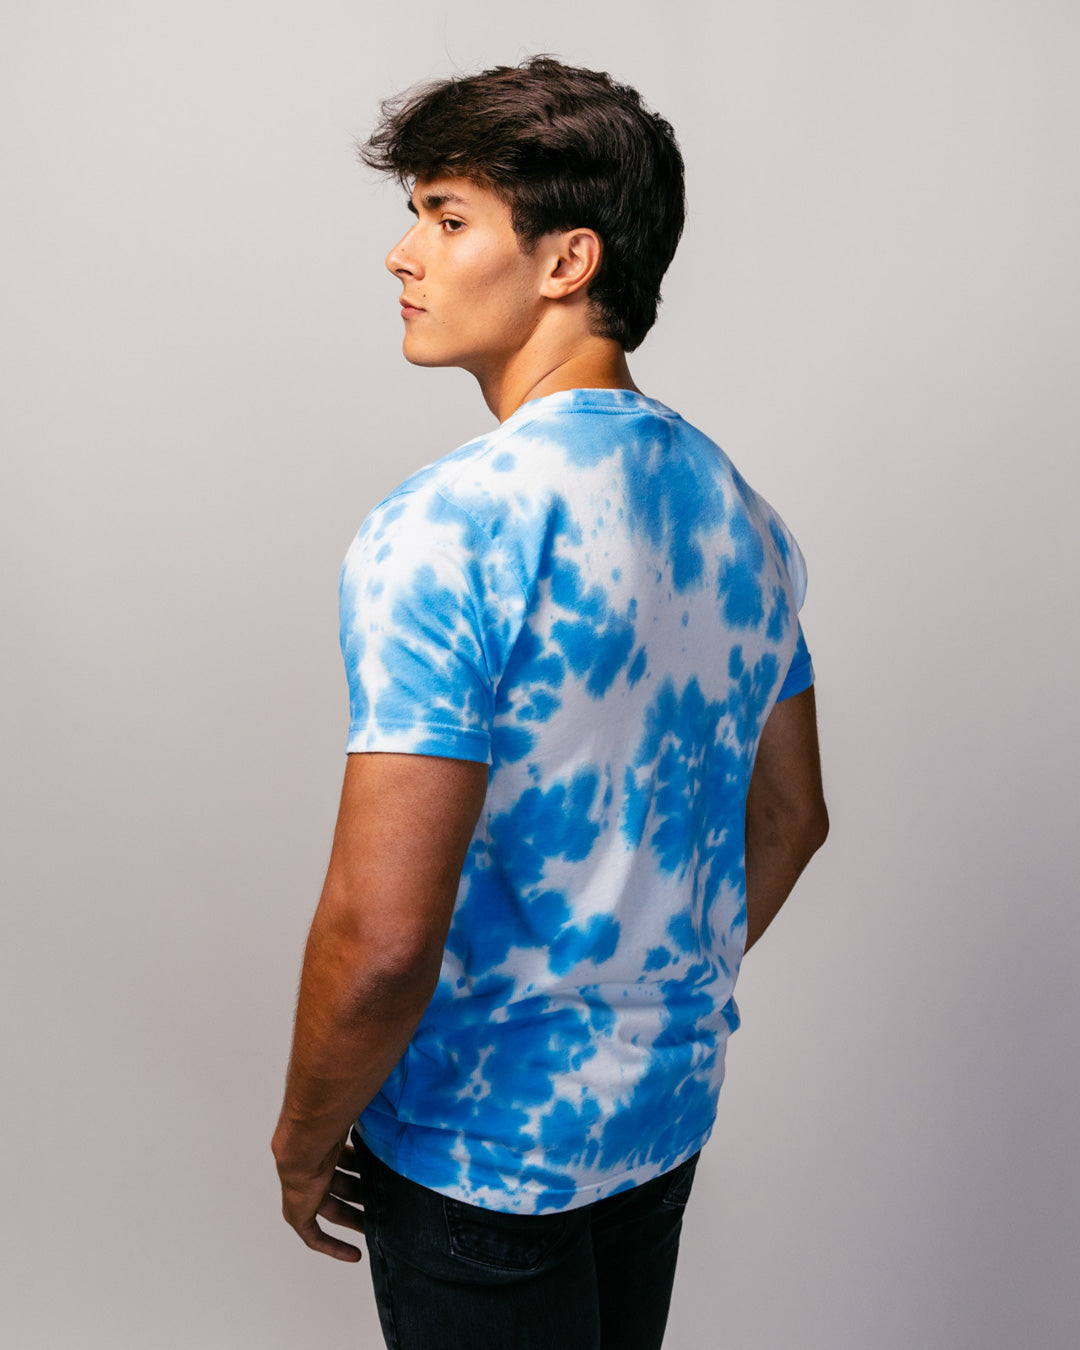 Blue and White Tie Dye Unisex Essential T-Shirt | Charlie Hustle 39 / Xs